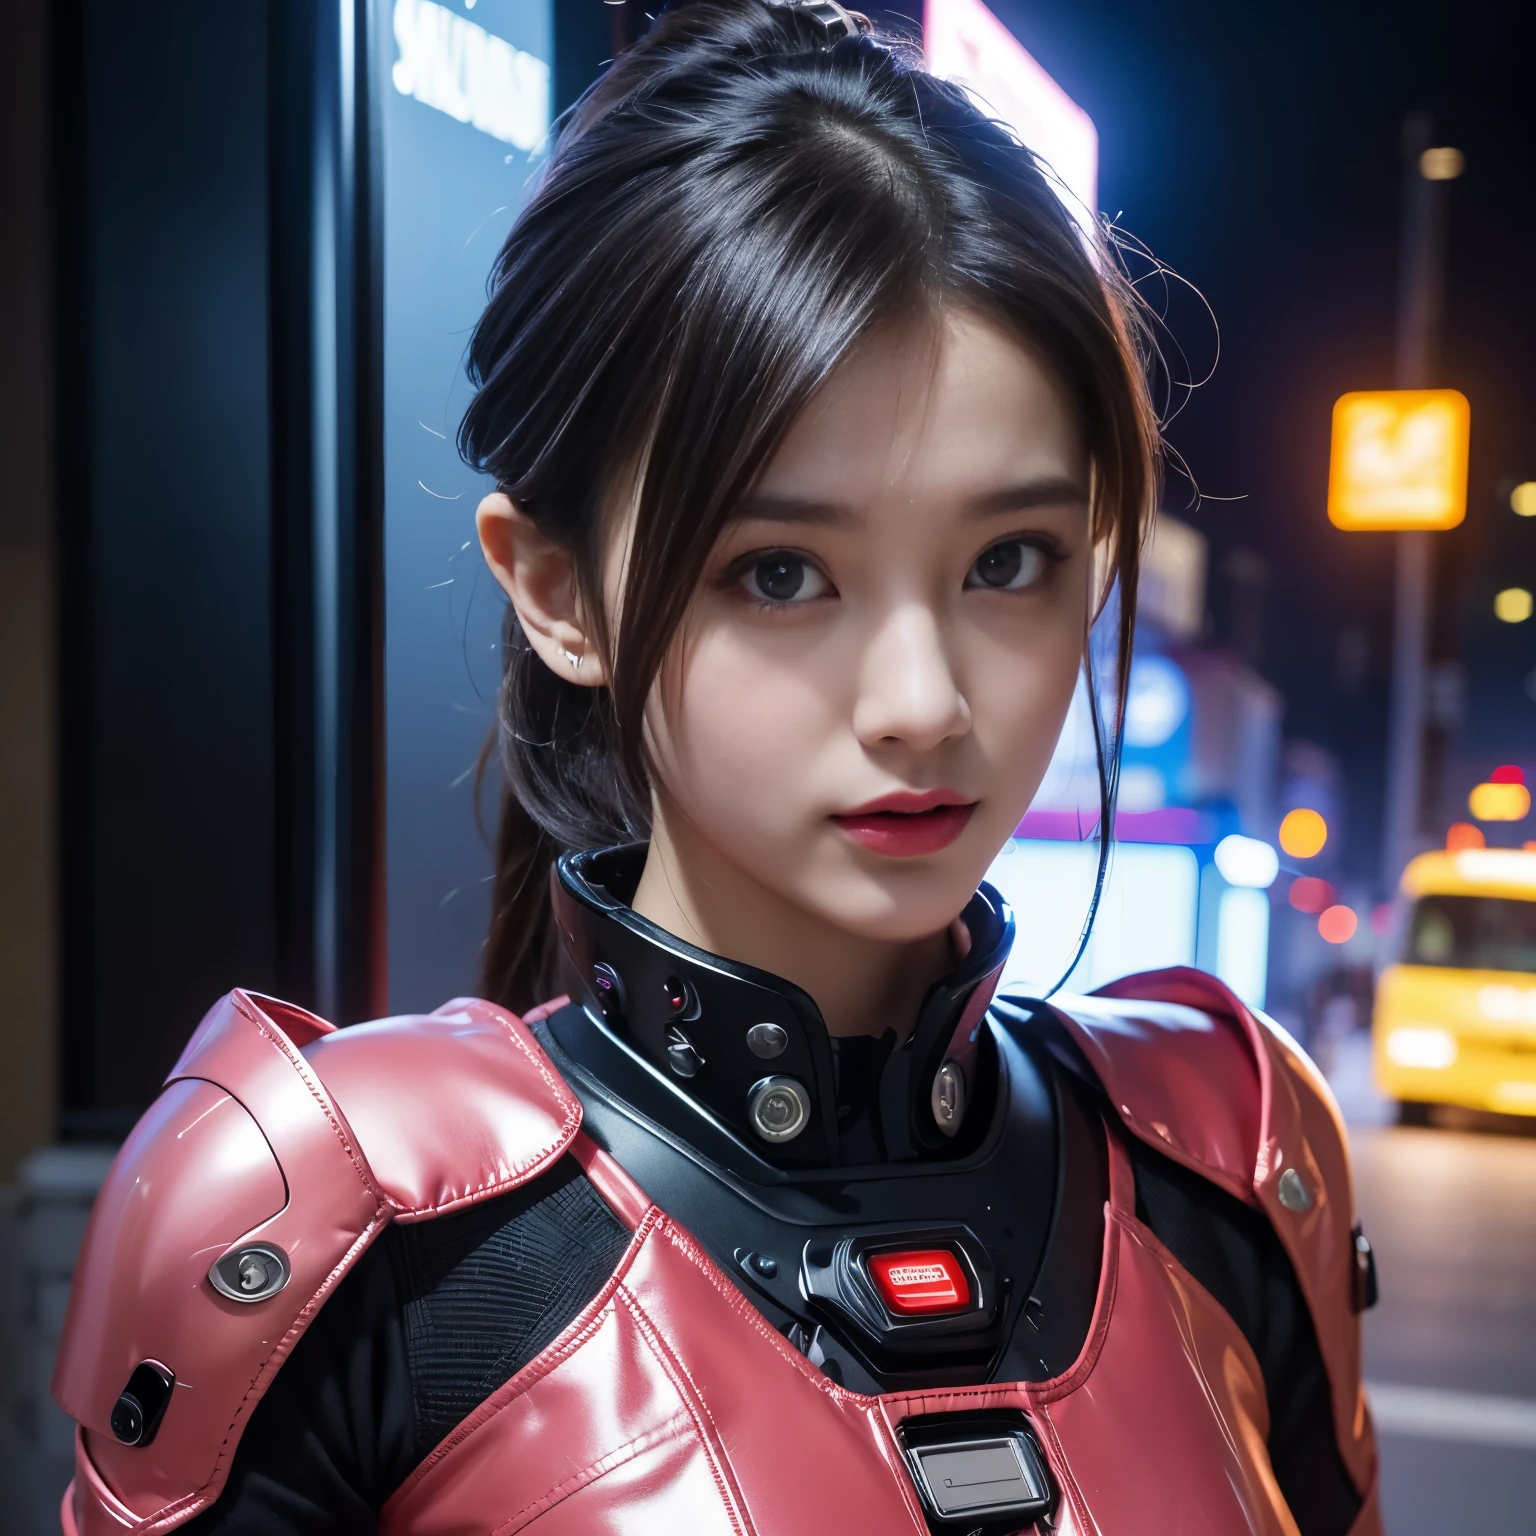 (highest quality、4k、8k、High resolution、masterpiece: 1.2)、Super detailed、(real、photorealistic、photorealistic: 1.37)、SF、beautiful young woman、bounty hunter、Cybernetic Weapons、cyberspace、High Tech City、Shining neon lights、((futuristic fashion))、((Skin-tight pink metallic outfit))、mythical creatures、standing split:1.7、Fast-paced、Exciting soundtrack、explosion、Advanced technology、Sharp contrast、Gritty atmosphere、Black Market Trading、Skyline at night、Steampunk elements、Laser gun combat、Hidden Alley、hovering drone、Enhanced Vision、The unforgiving metropolis、Cybernetic Implants、Secret organizationysterious Informant、High Speed Chase、Impressive acrobatics、Colorful holograms、Urban Exploration、Navigating Virtual Reality、A diverse and multicultural society、Dystopian society、 Crowded city street、hall々A high-rise building、Android Companion、Illegal cybernetic modifications、A heart-pounding adrenaline rush、Heroic determination